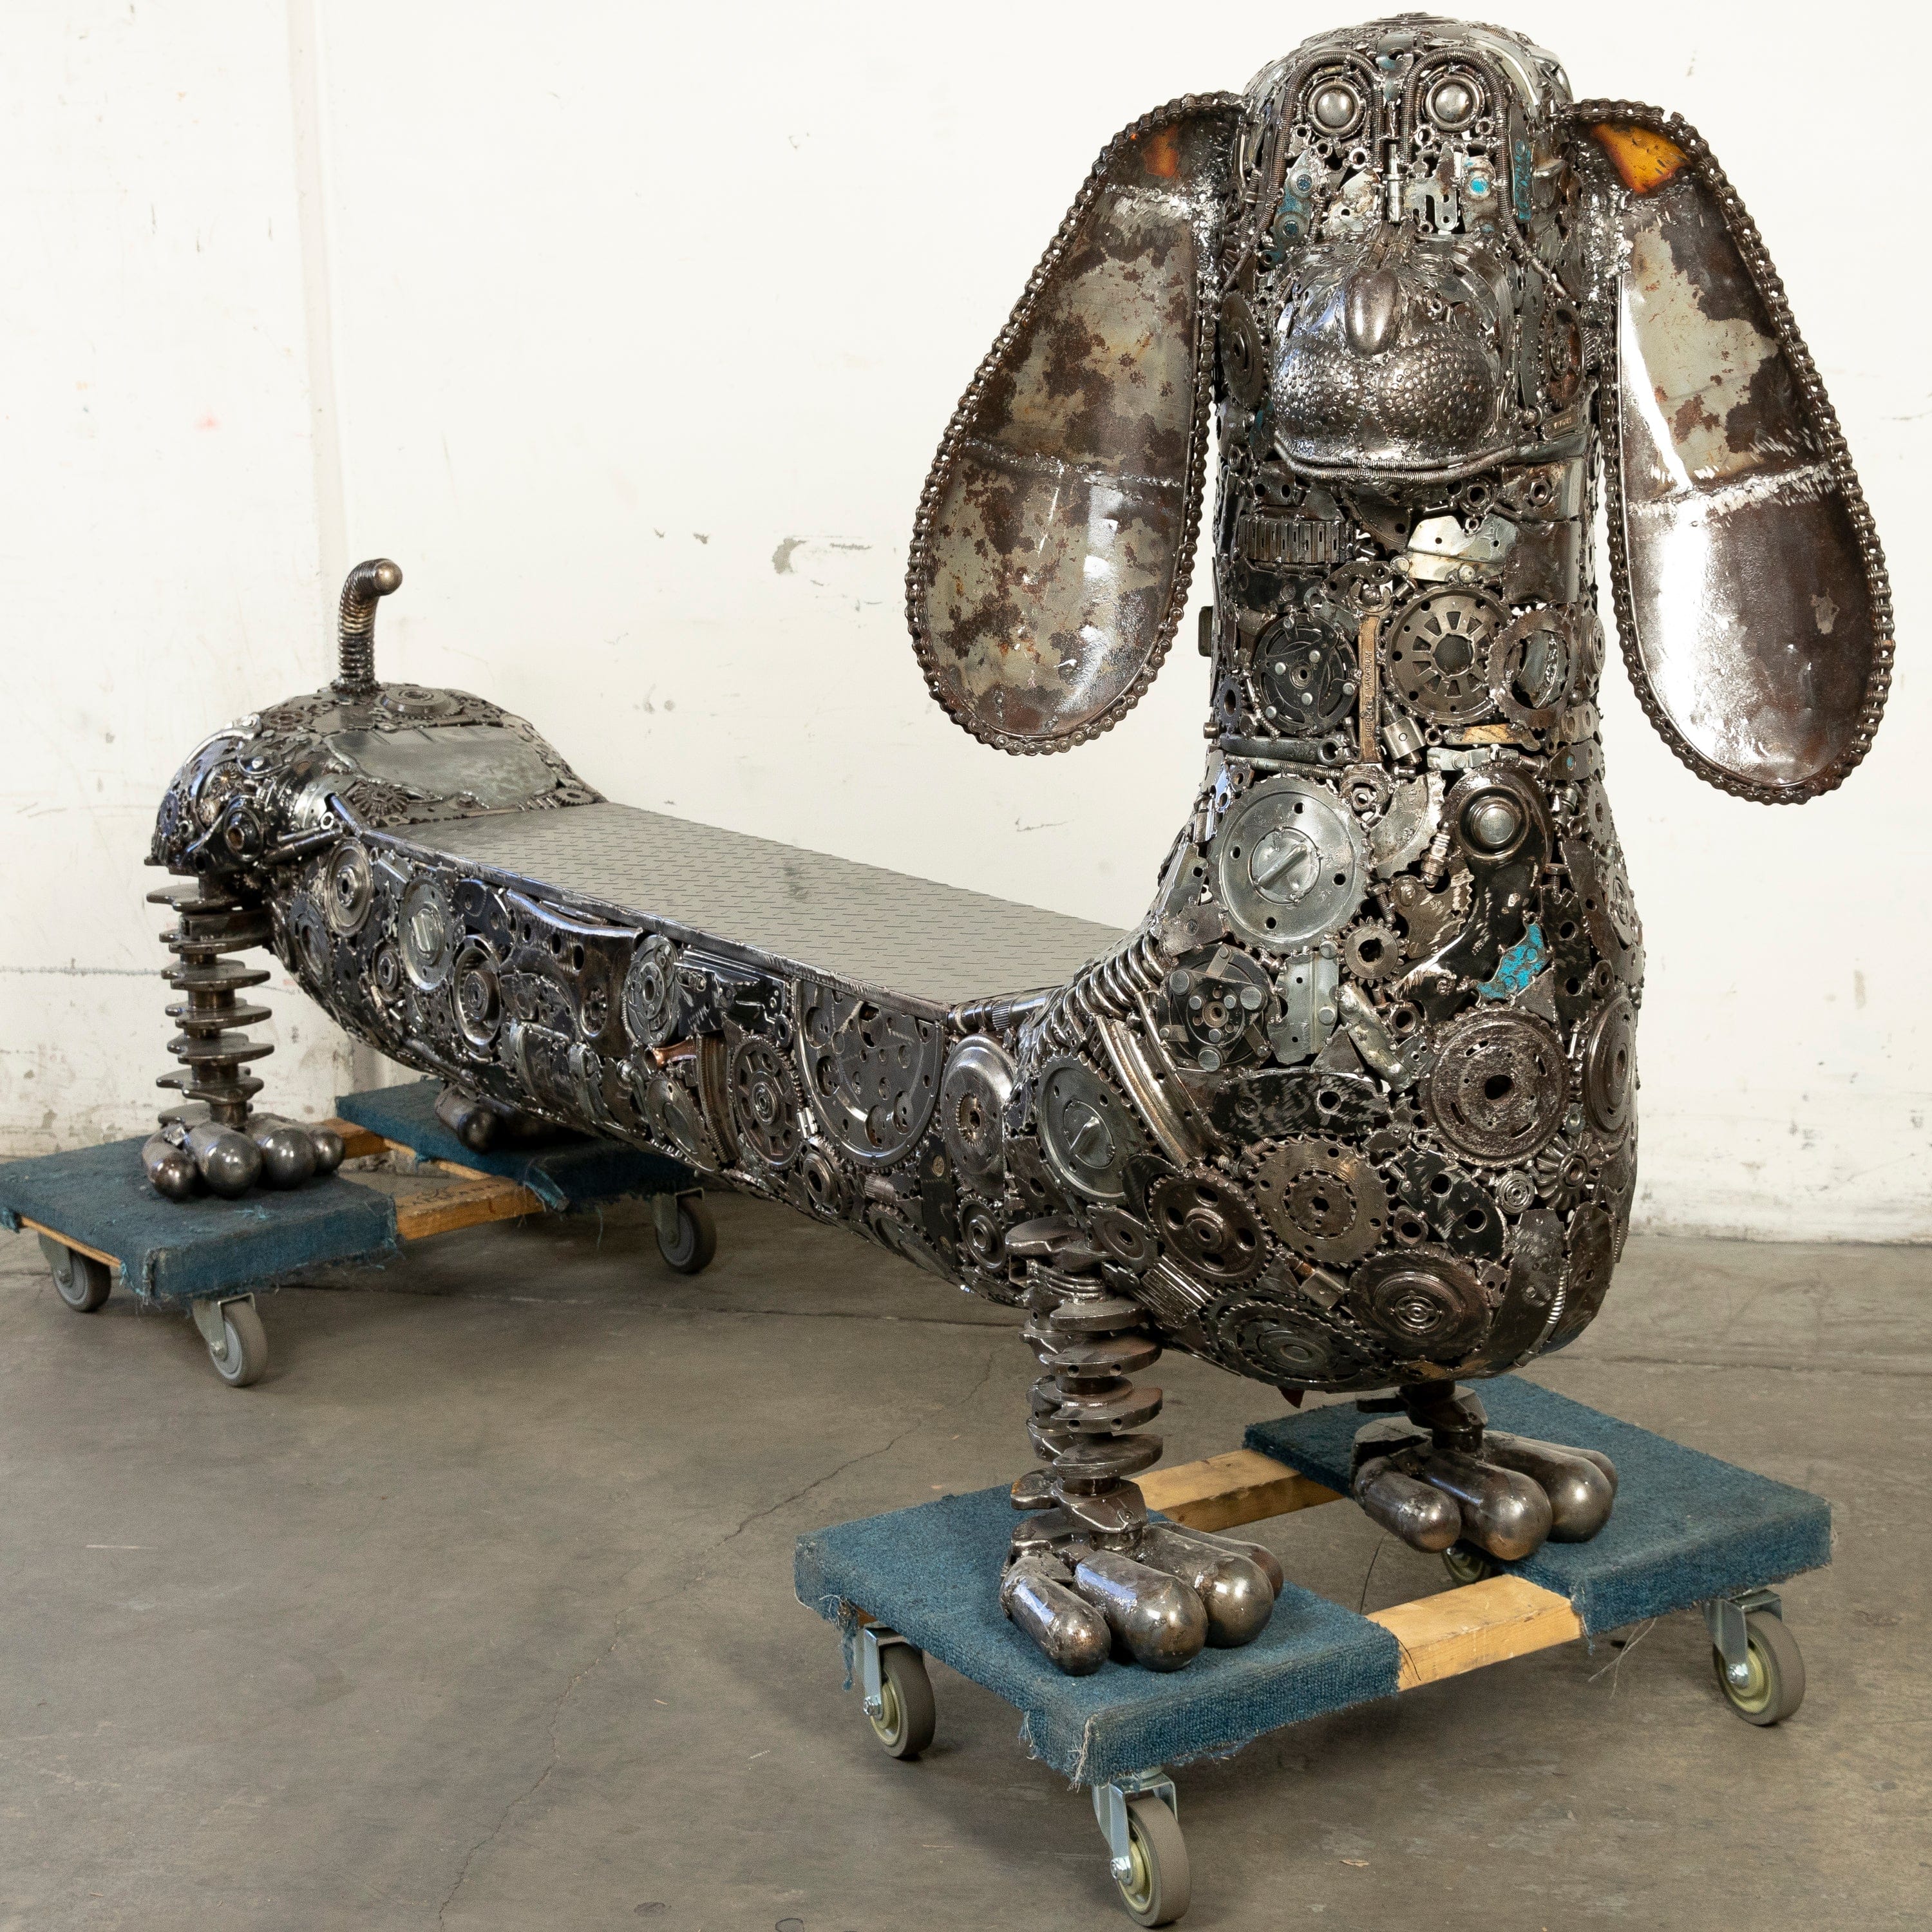 Kalifano Recycled Metal Art 52" Dog Bench Inspired Recycled Metal Art Sculpture RMS-DGBEN130-N